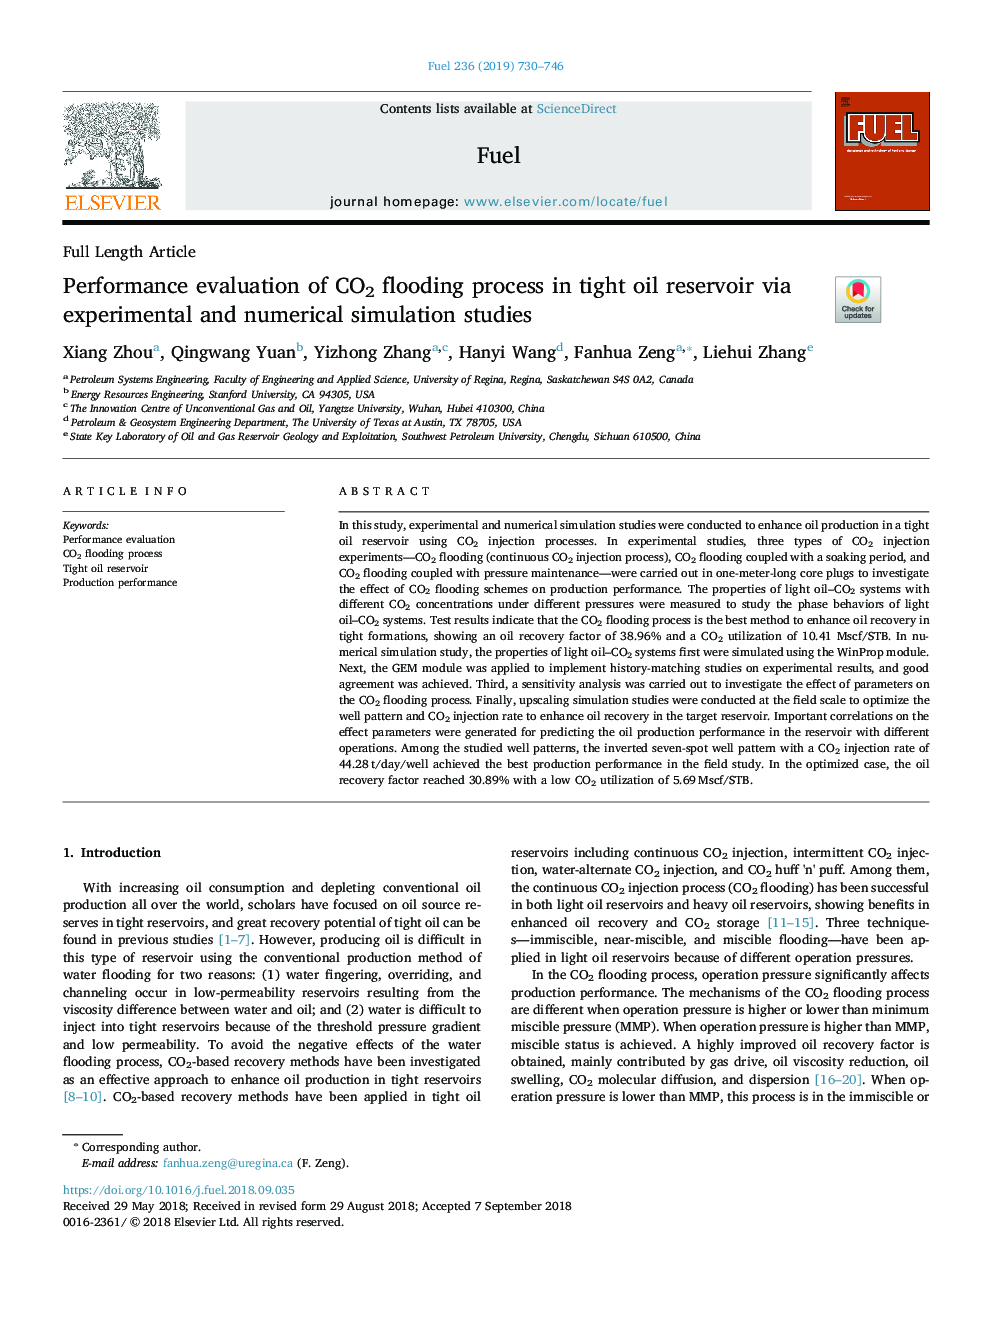 Performance evaluation of CO2 flooding process in tight oil reservoir via experimental and numerical simulation studies